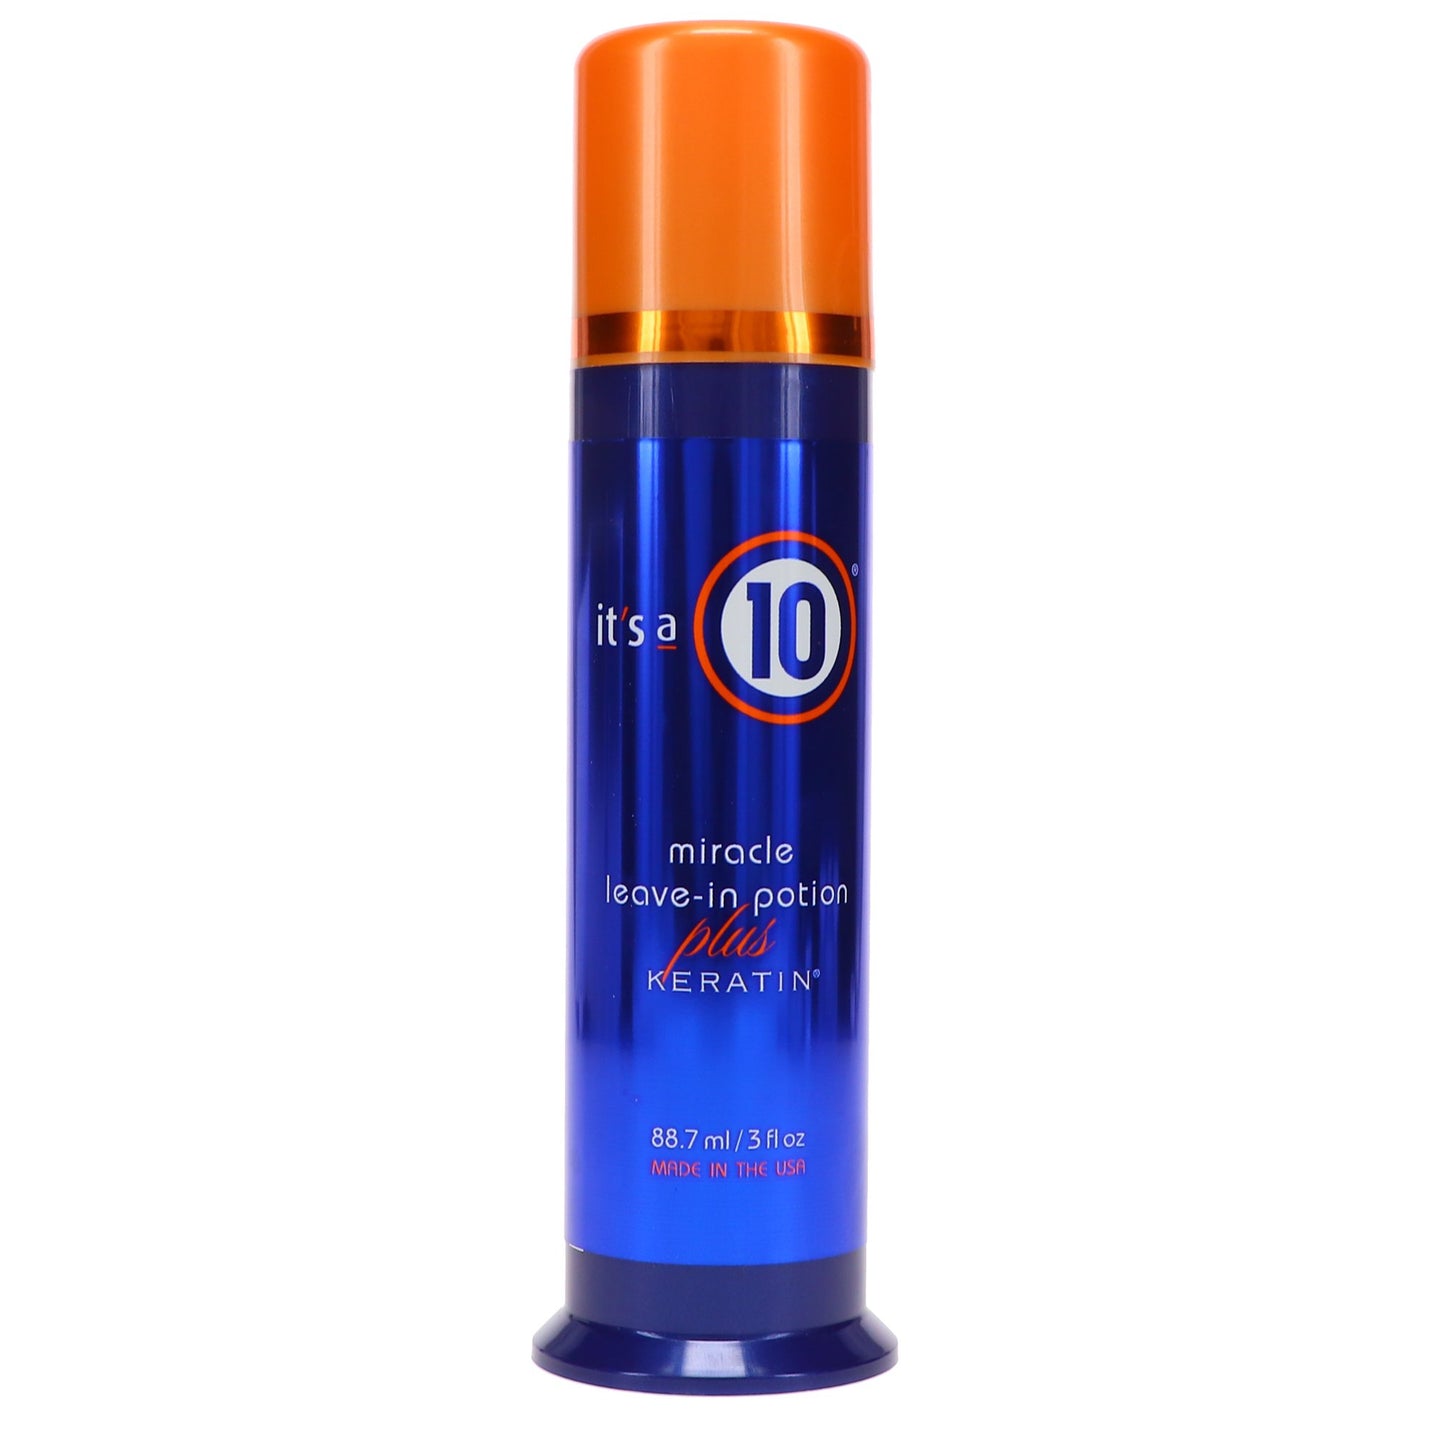 It's A 10 Miracle Leave-in Potion Plus KERATIN 3 oz